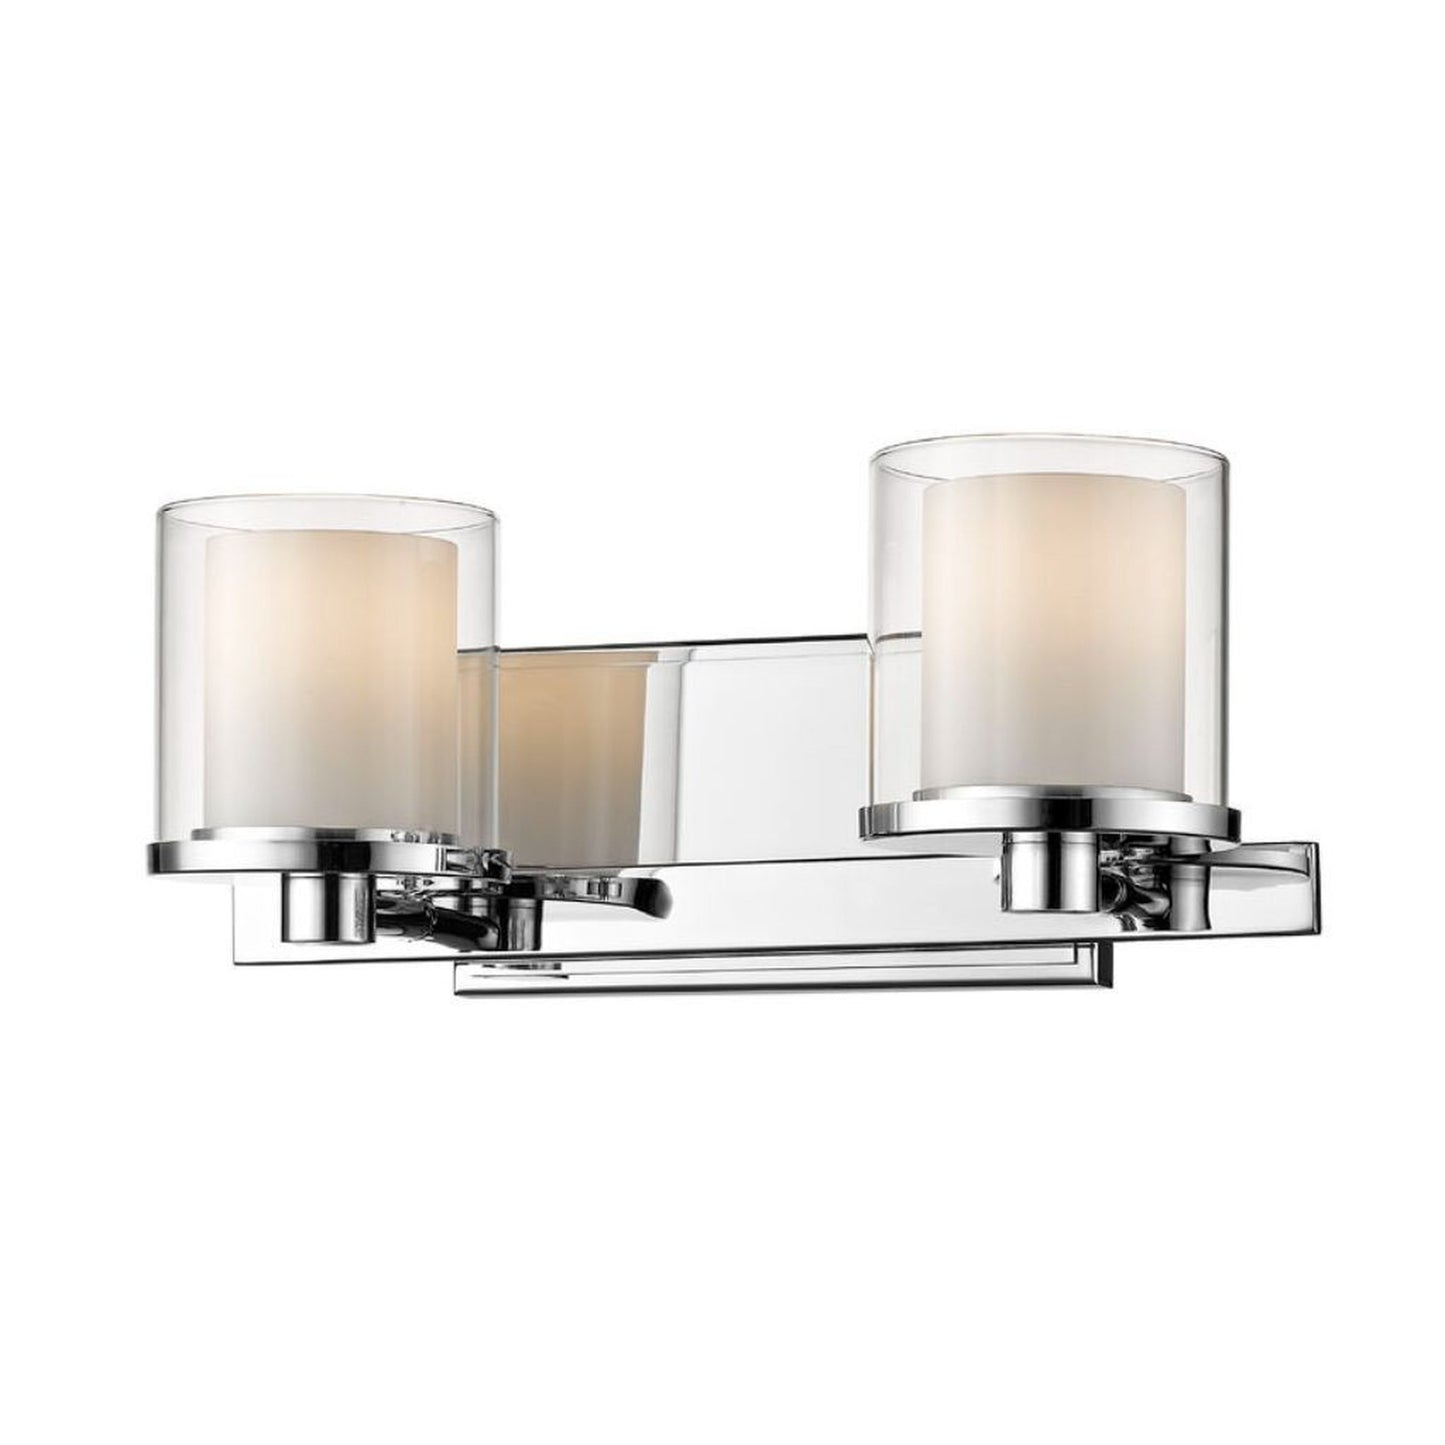 Z-Lite Schema 15" 2-Light LED Chrome Vanity Light With Clear and Matte Opal Glass Shade